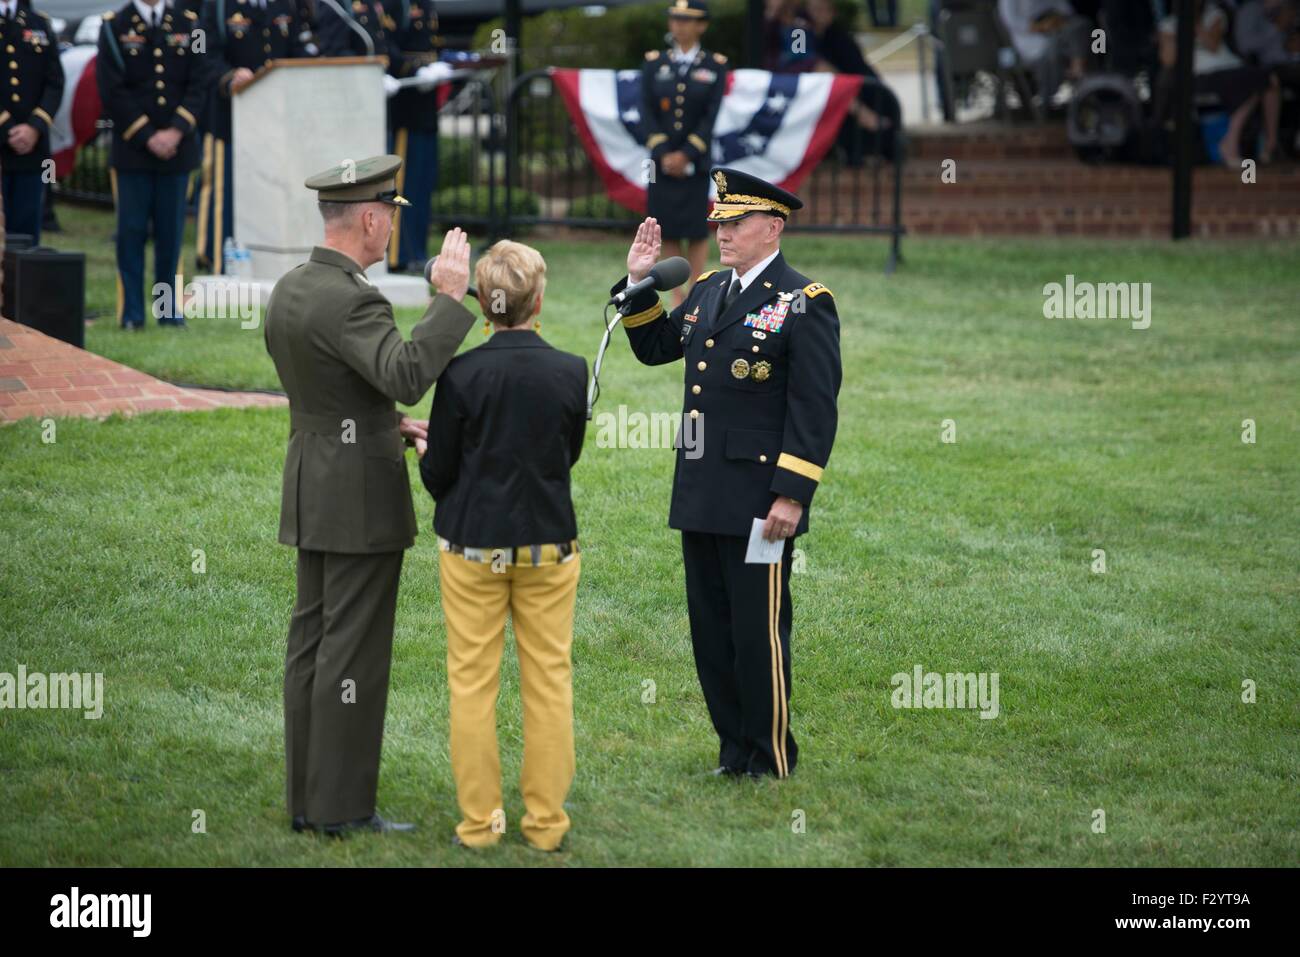 Arlington, Virginia, USA. 25th Sep, 2015. Outgoing Chairman of the Joint Chiefs Army Gen. Martin Dempsey administers the oath to incoming Chairman Marine Gen. Joseph Dunford during a change of responsibility ceremony at Joint Base Myer-Henderson Hall September 25, 2015 in Arlington, Virginia. Gen. Dempsey retires from the military after 41 years in service and is succeeded by Marine Gen. Joseph Dunford. Stock Photo